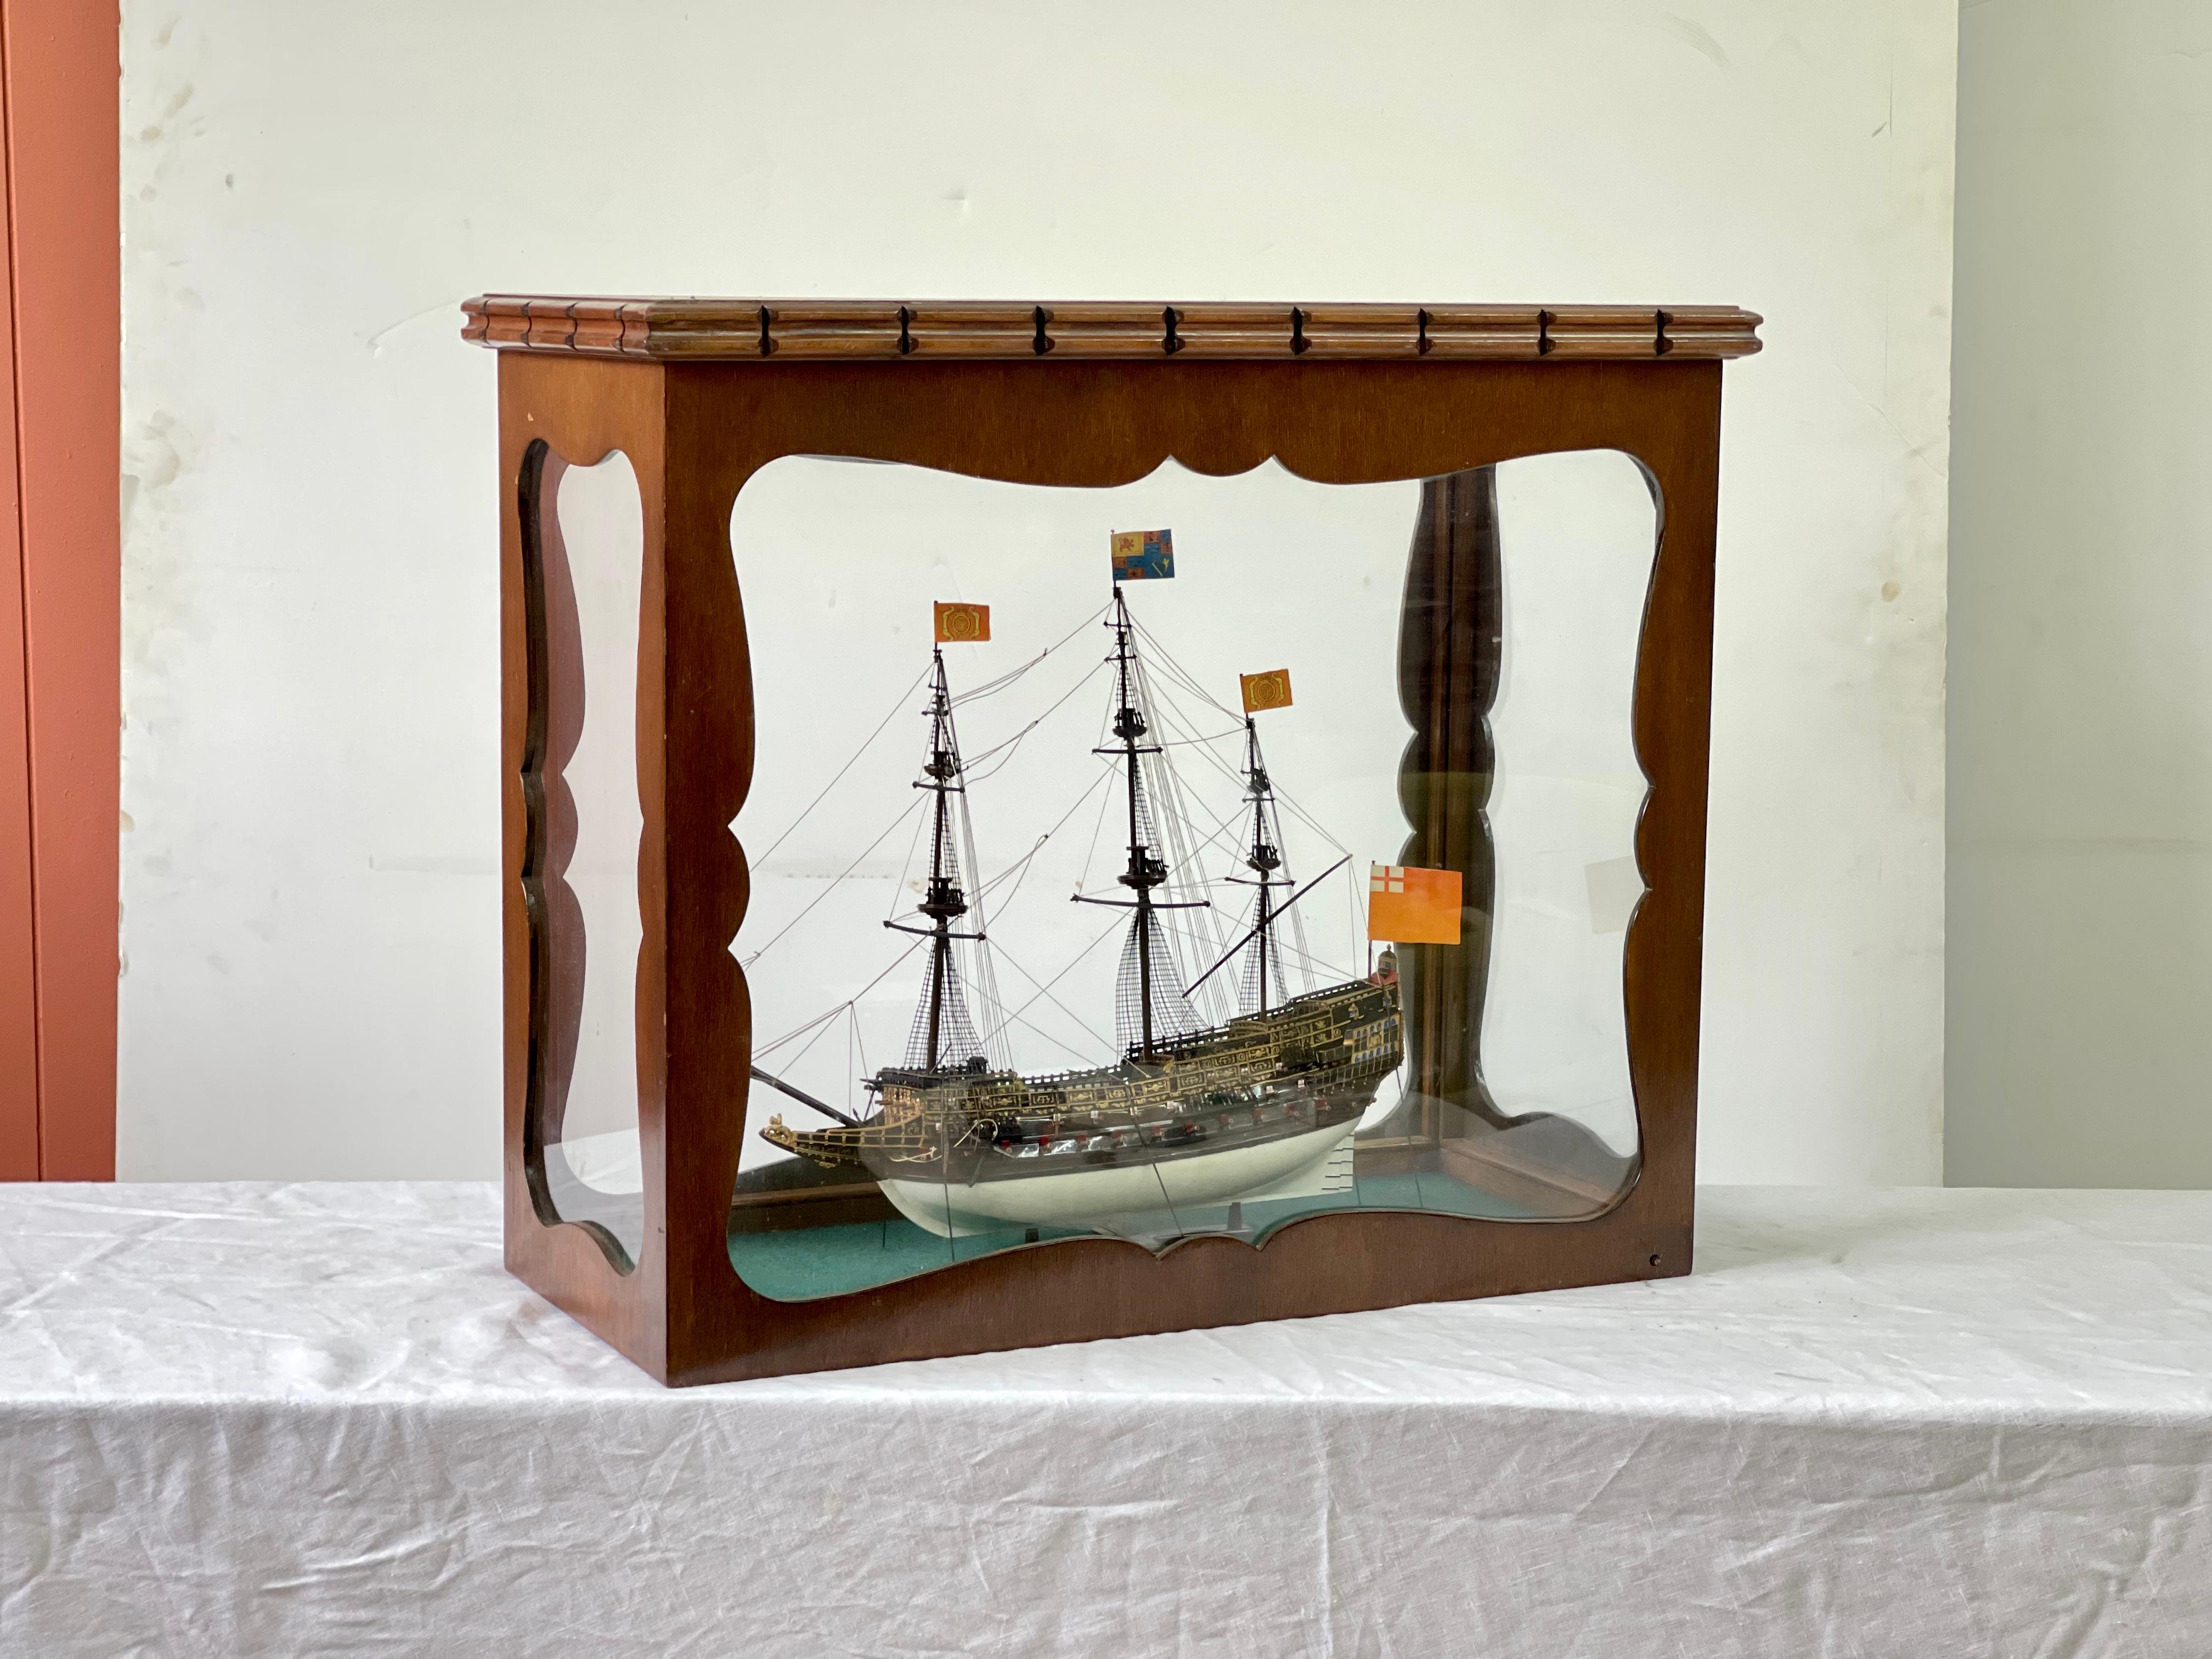 20th Century English ship model of the HMS Revenge, an English galleon built by Sir John Hawkins in the shipyards of Deptford in 1577. The sailing warship model is enclosed by a custom glass and mahogany showcase.